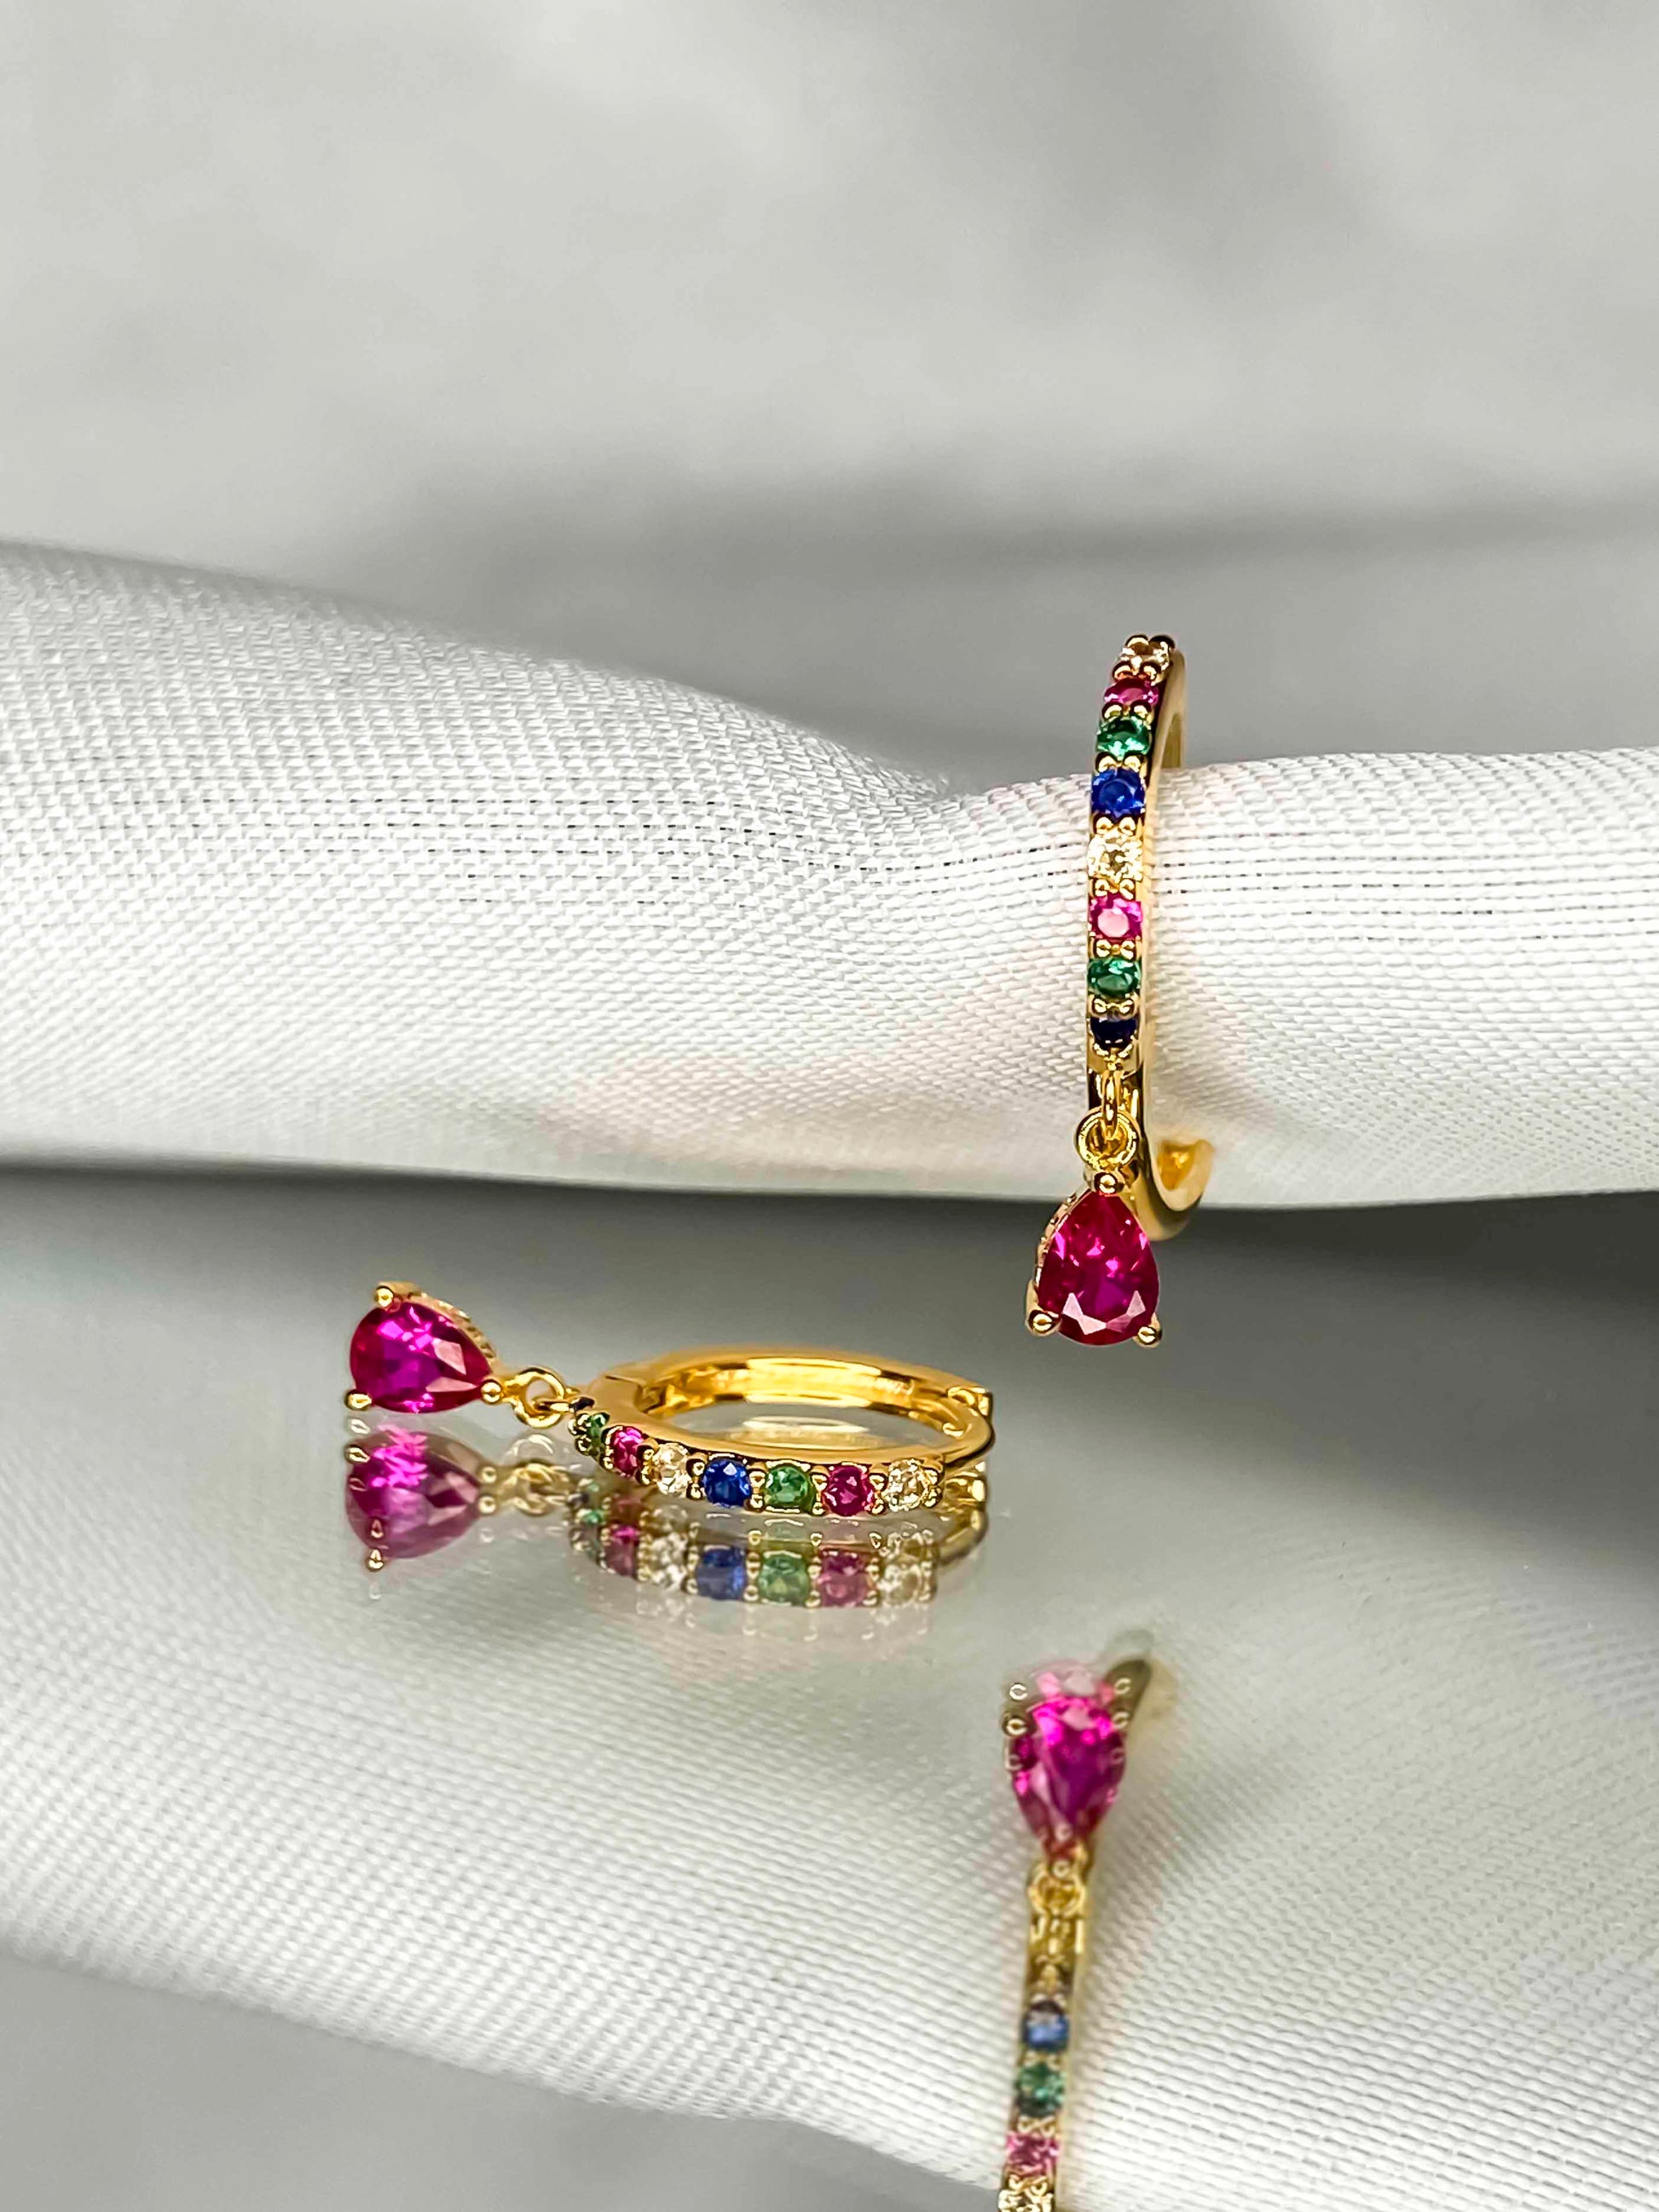 925 gold-plated sterling silver huggie hoop earrings with multicolored zirconia stones. 